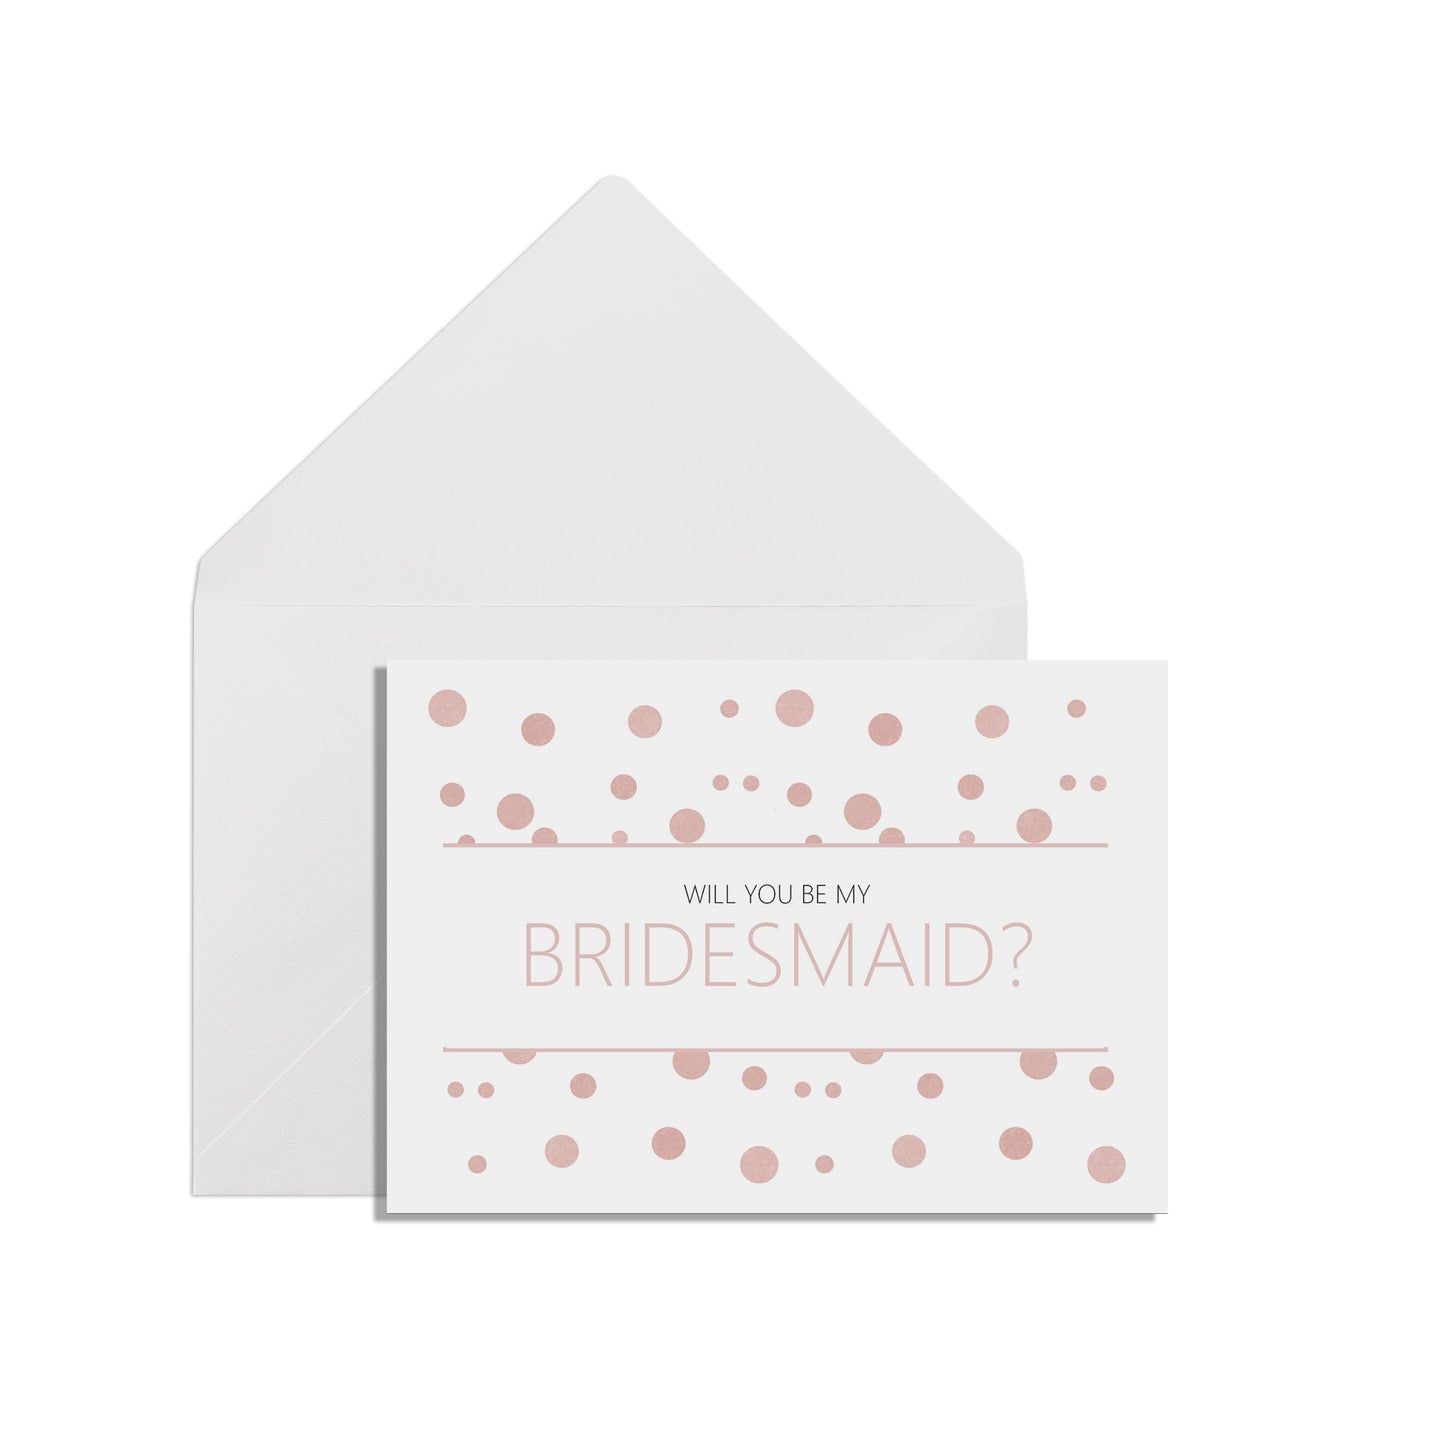 Will You Be My Bridesmaid? A6 Blush Confetti Wedding Proposal Card With White Envelope